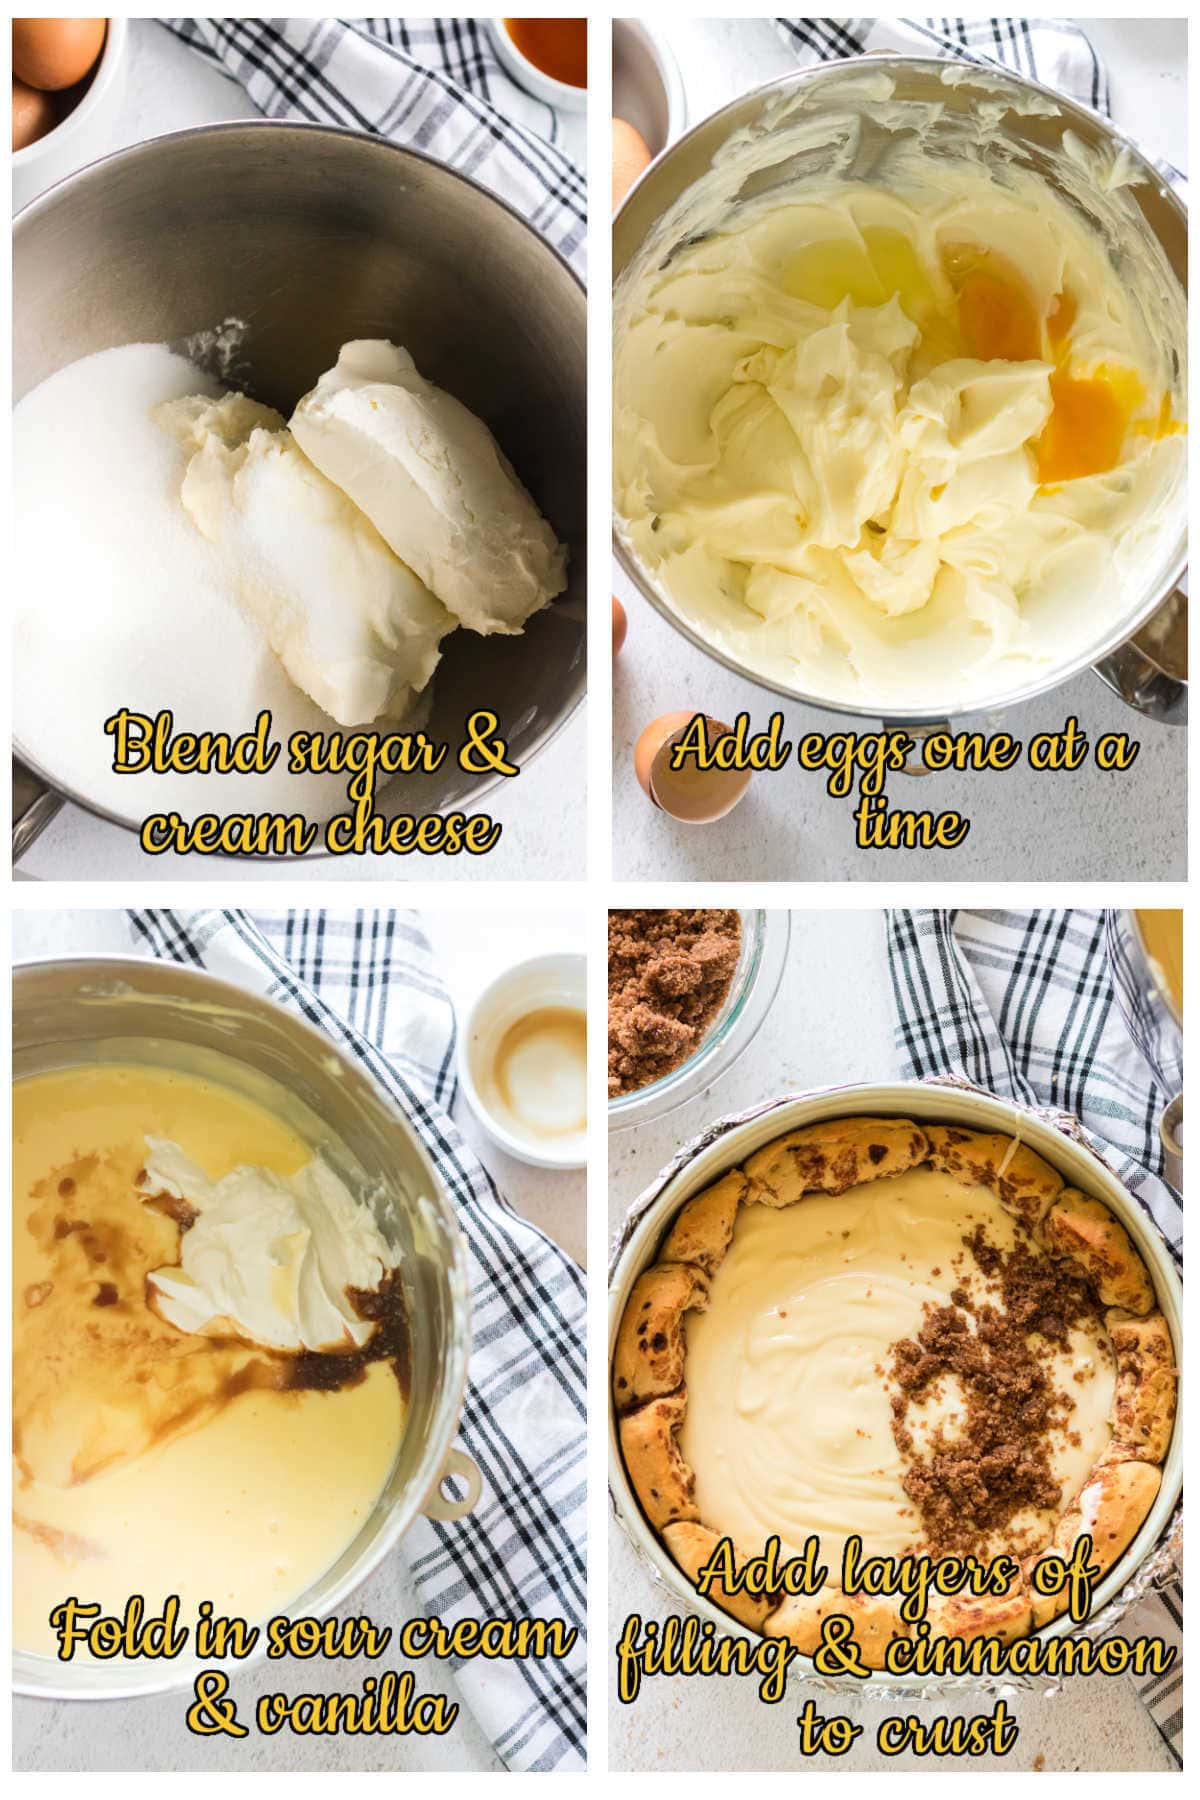 Step by step images for making the filling.